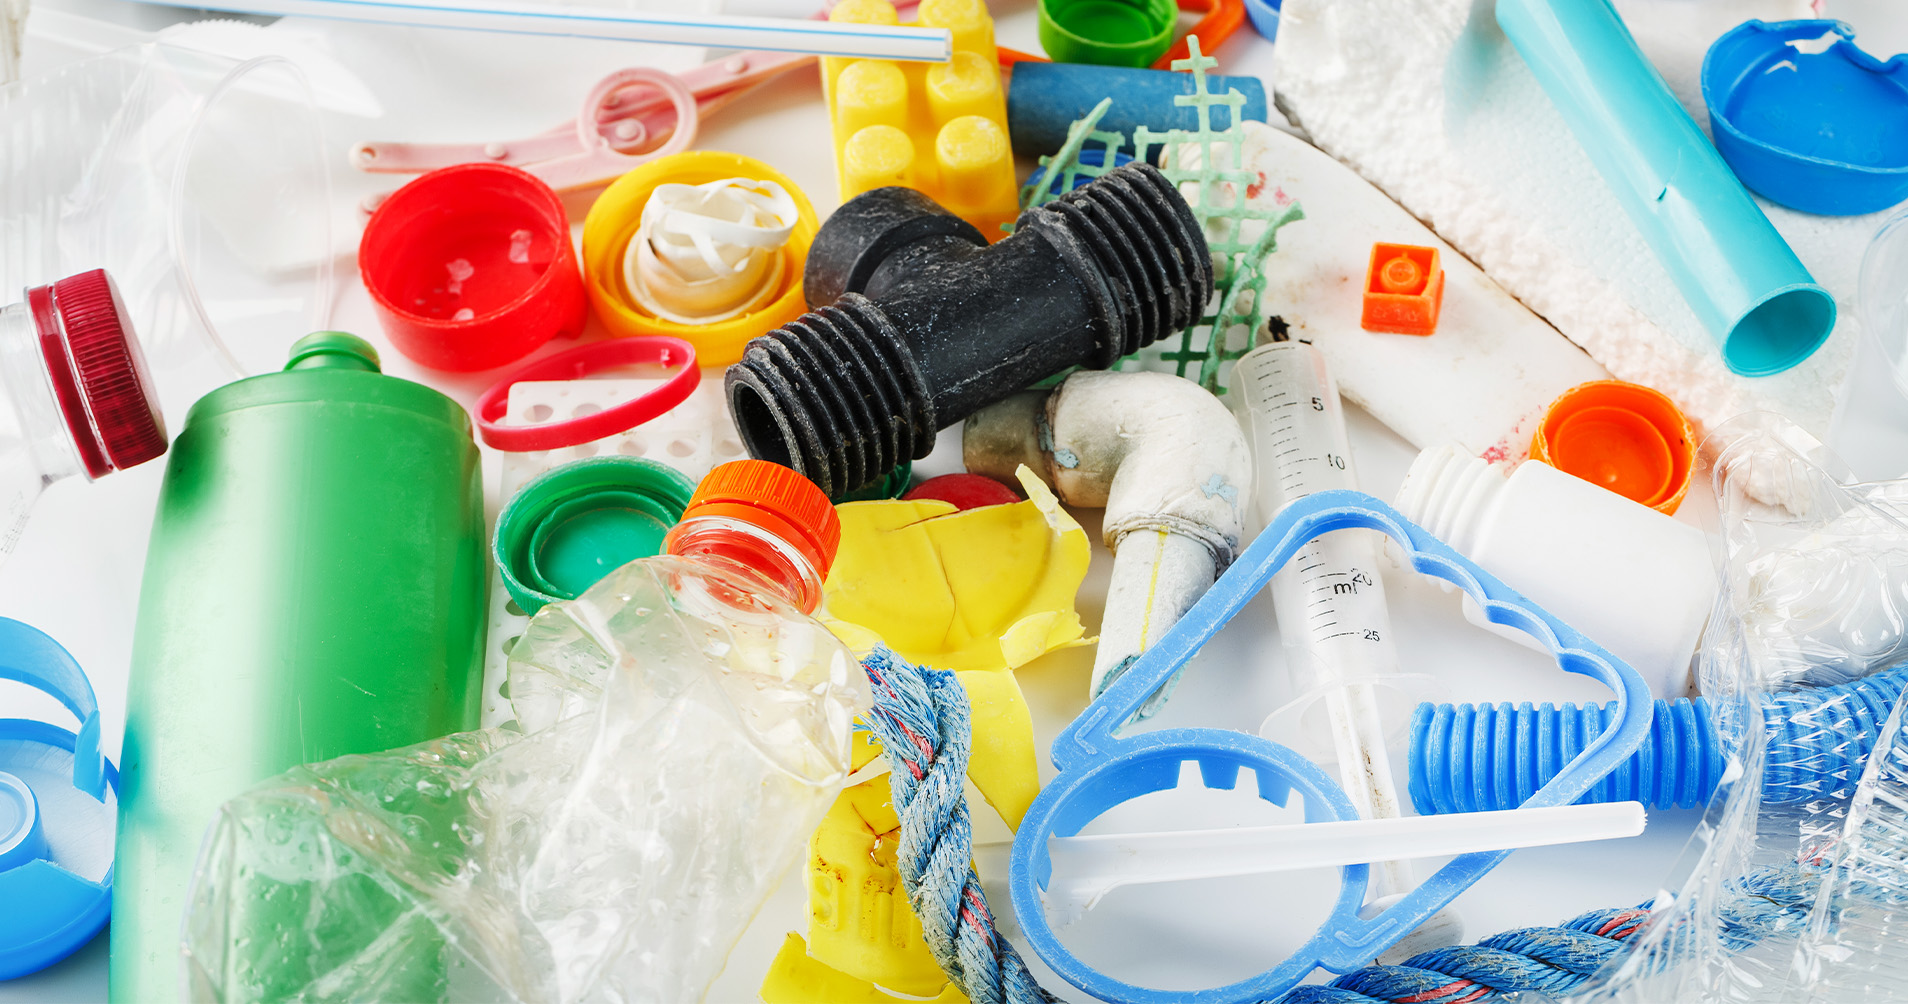 3 Key Areas of Plastic Waste Processing Innovation